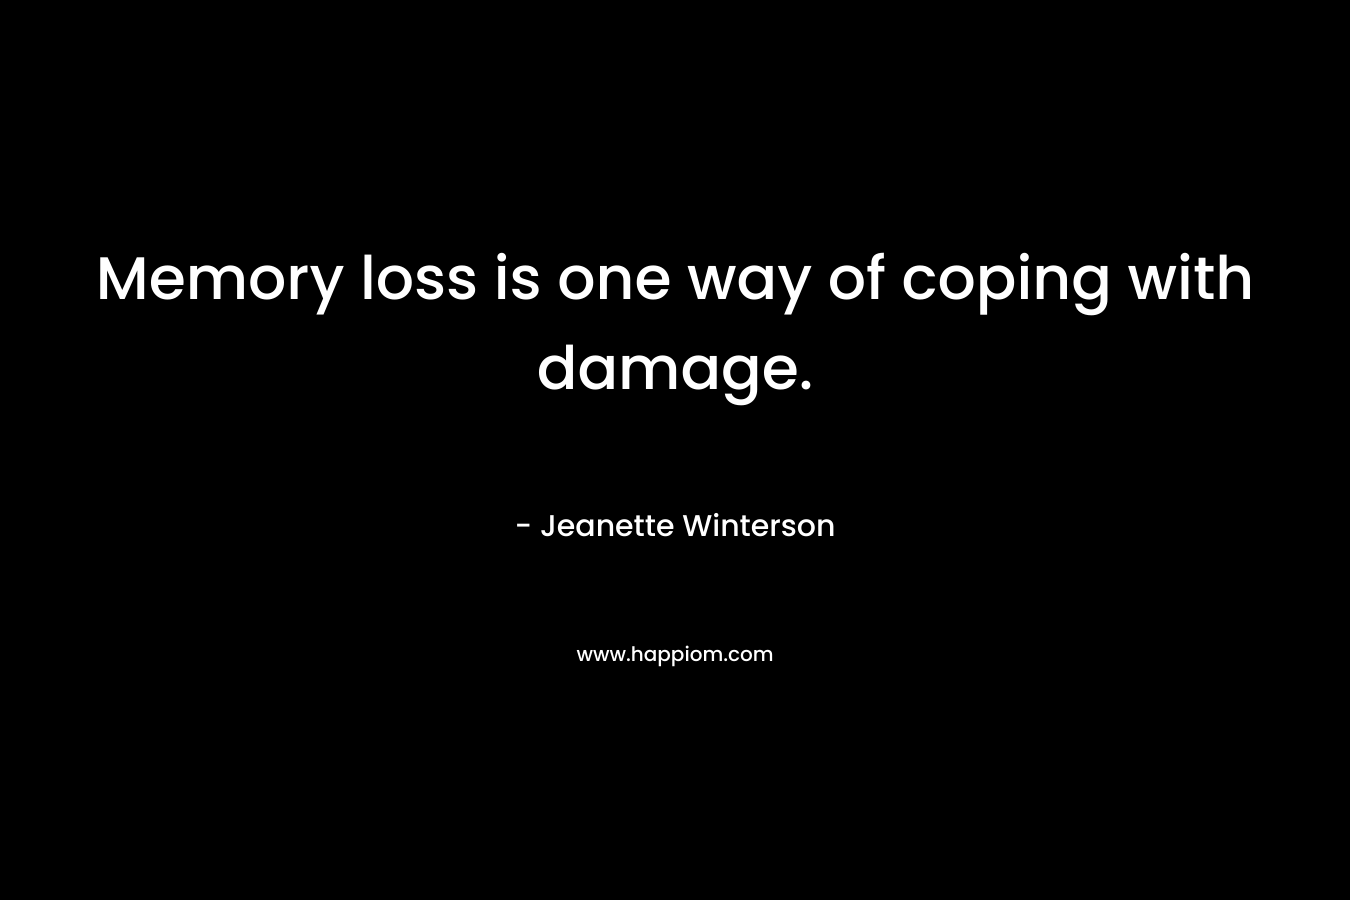 Memory loss is one way of coping with damage.